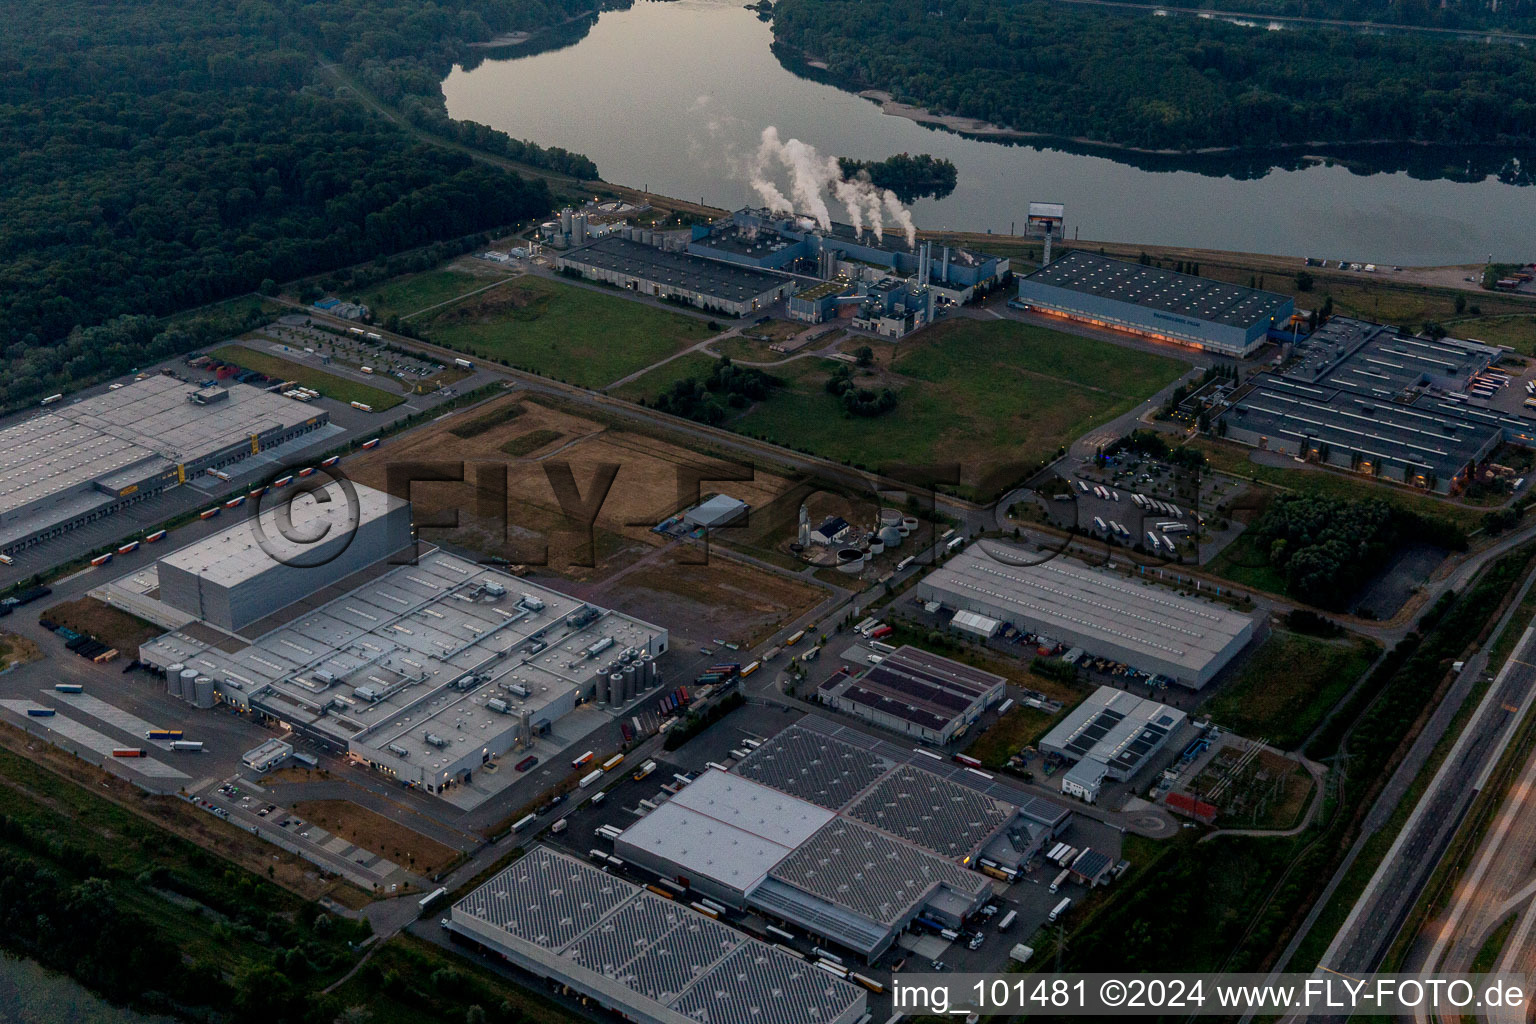 Oberwald industrial and commercial area in Wörth am Rhein in the state Rhineland-Palatinate, Germany